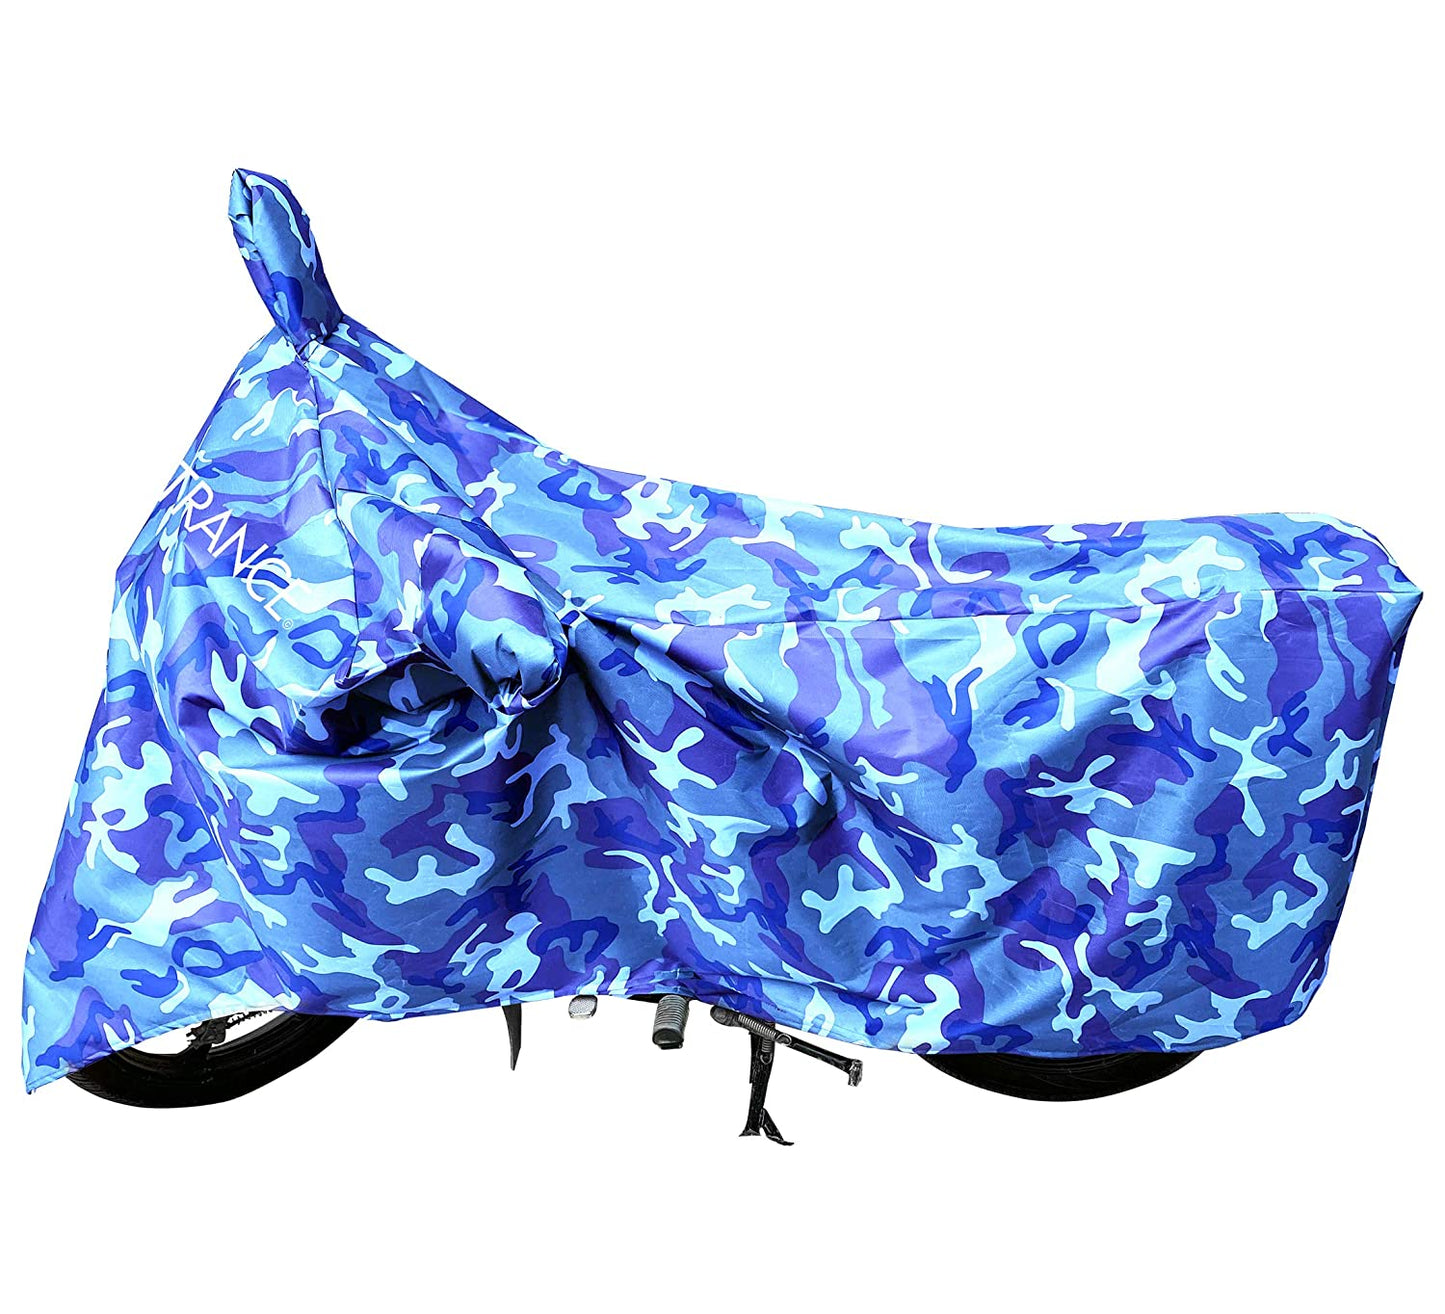 MotoTrance Jungle Bike Body Covers For TVS XL 100 - Interlock-Stitched Waterproof and Heat Resistant with Mirror Pockets